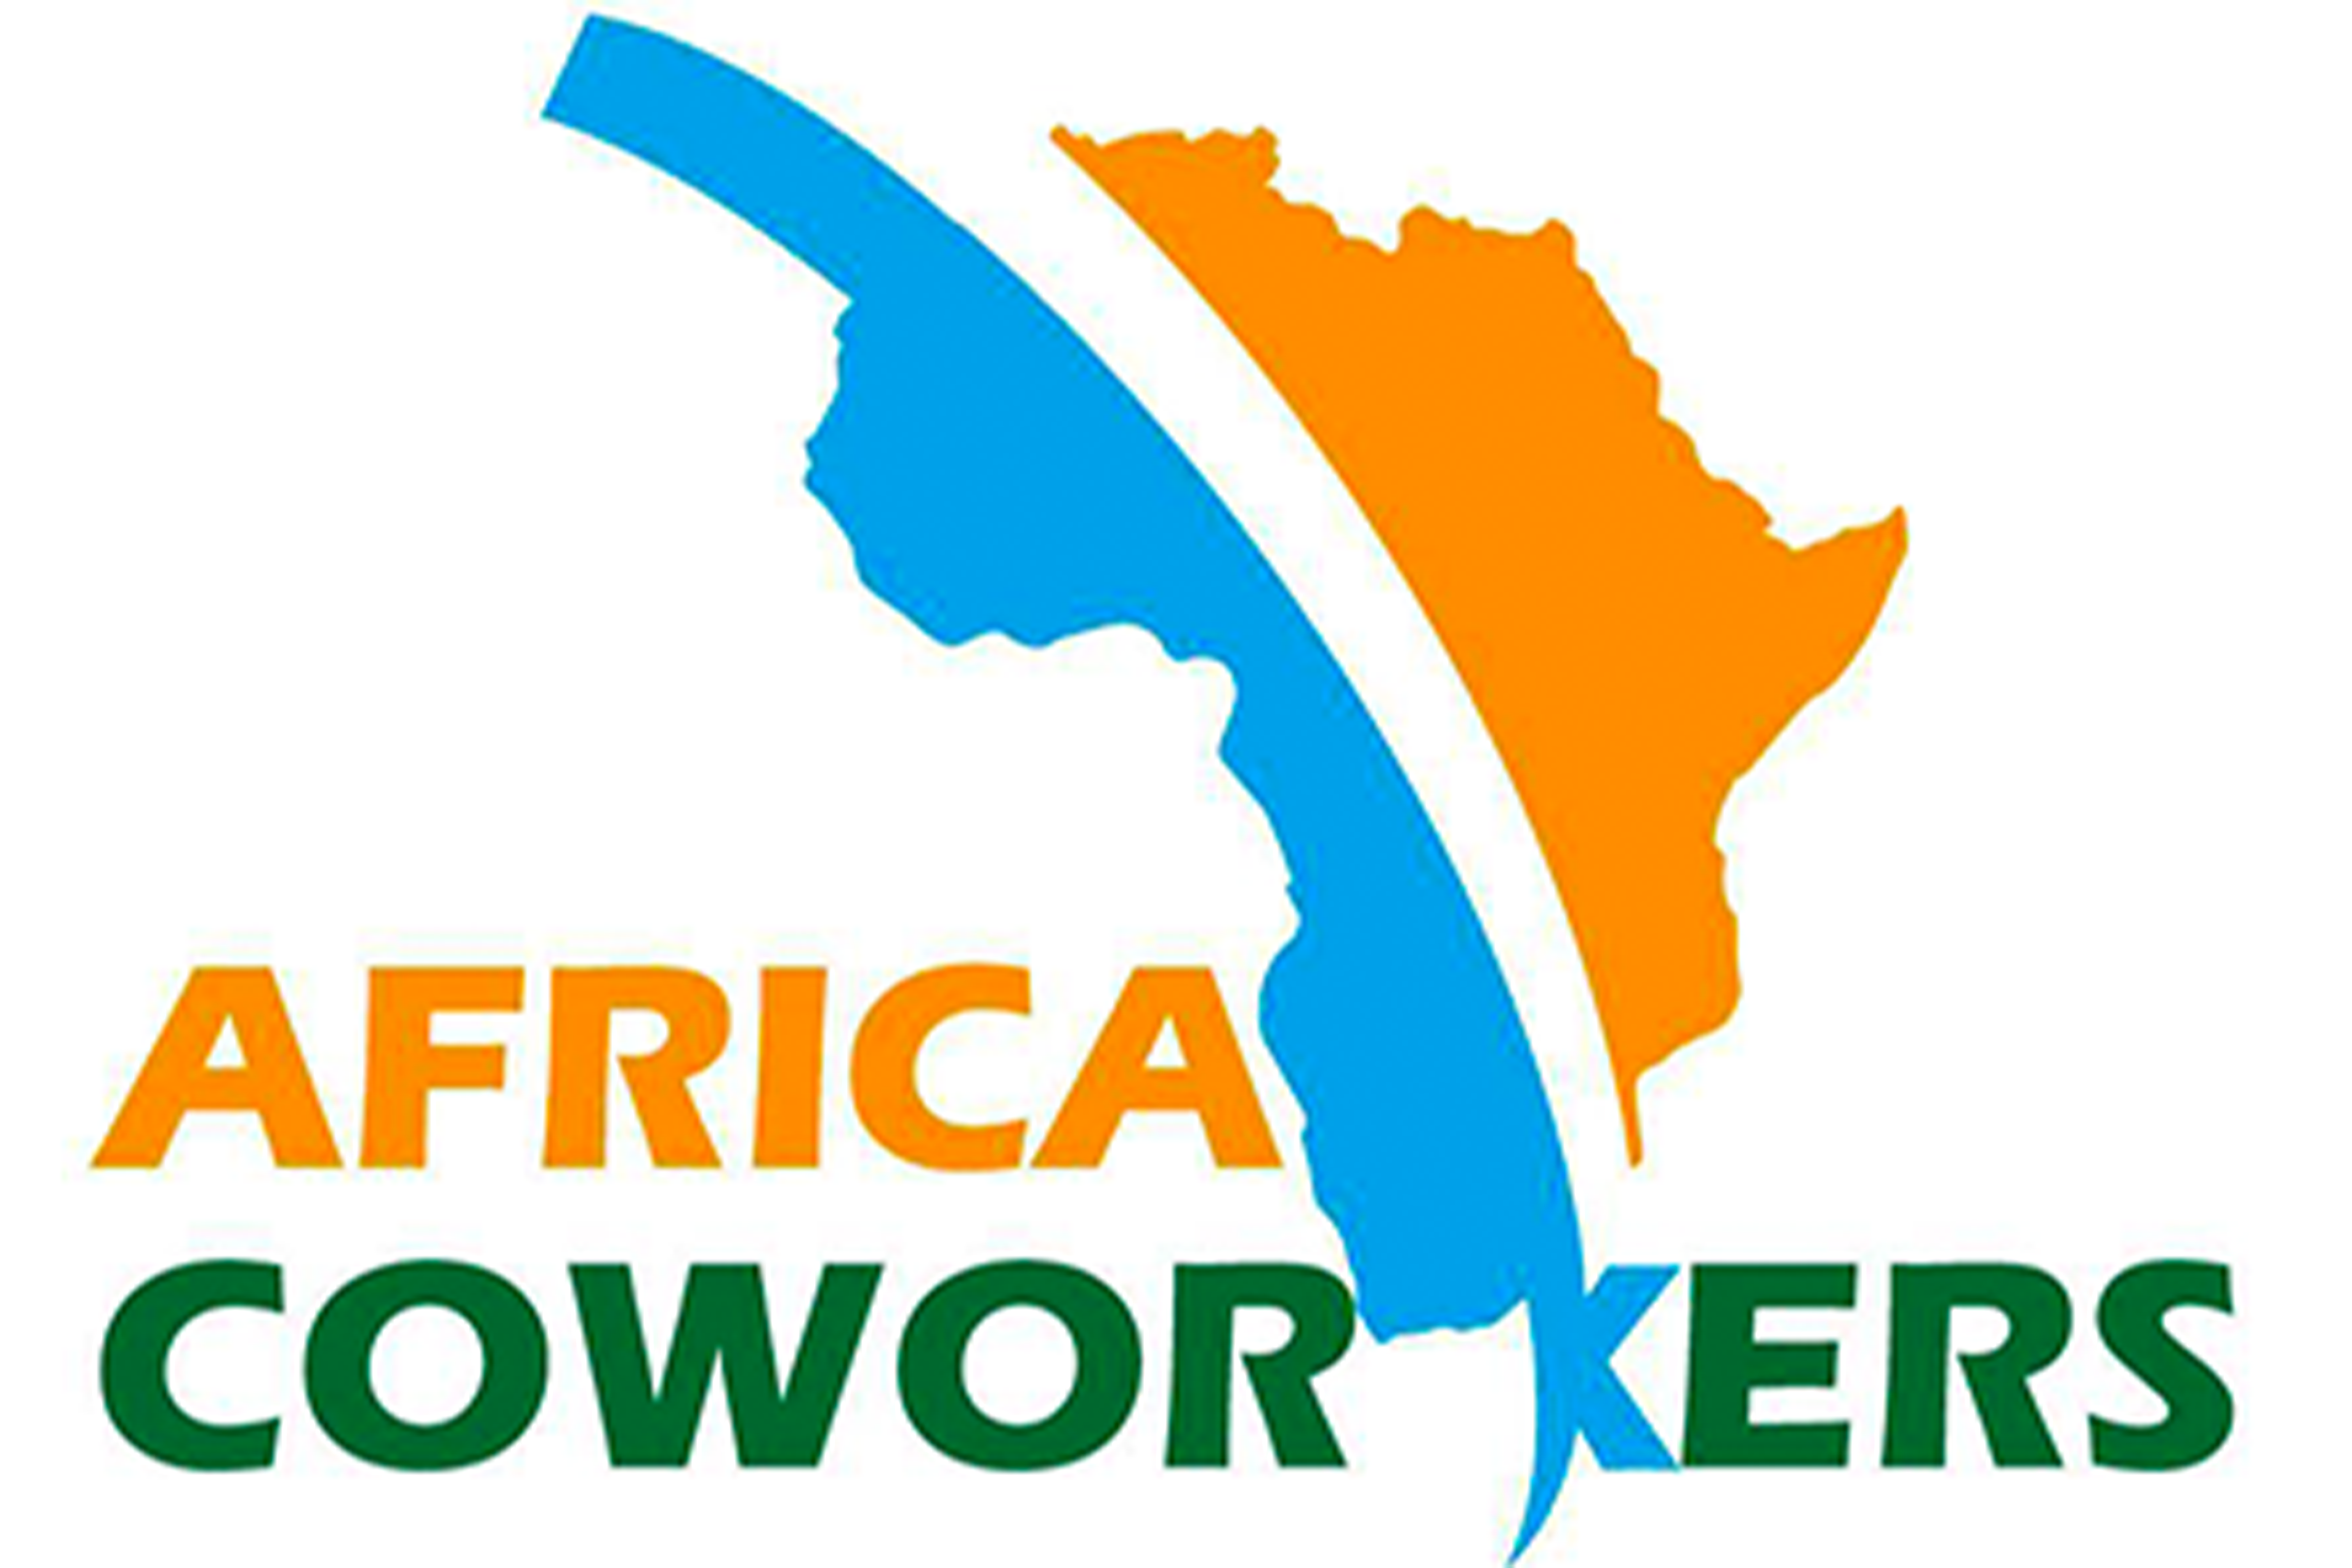 Africacoworkers